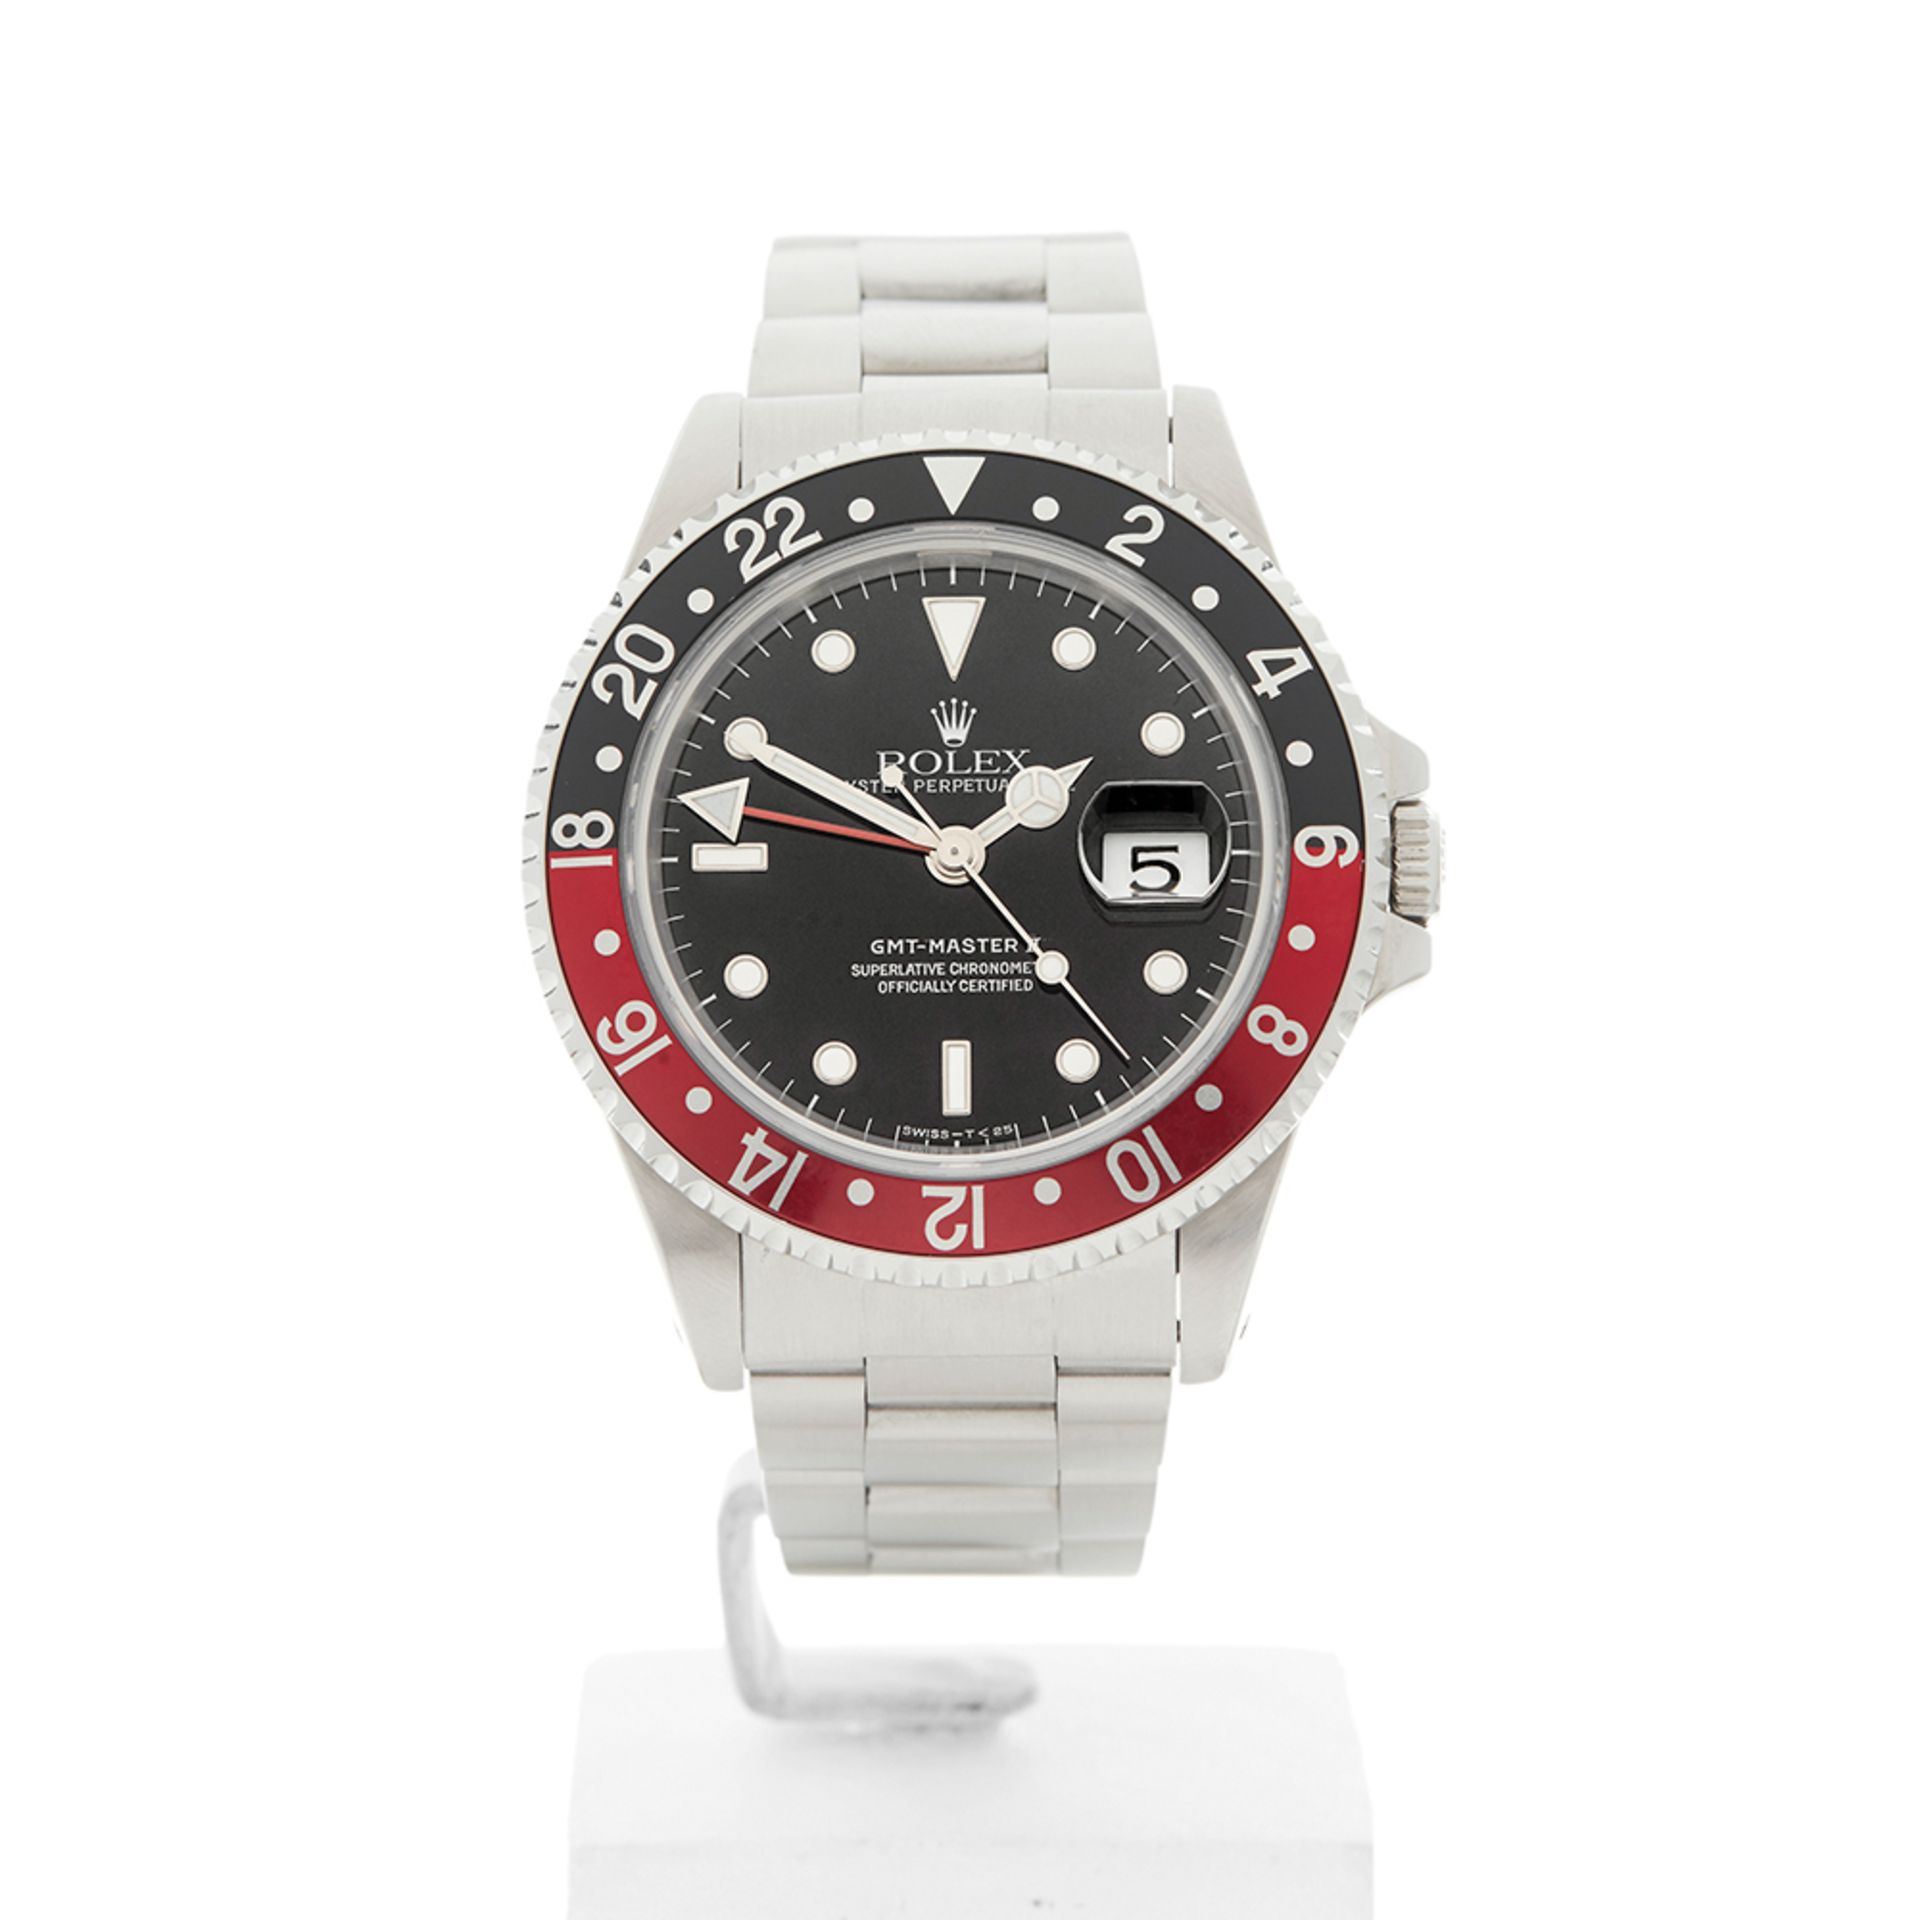 Rolex GMT-Master II Coke 40mm Stainless Steel 16710 - Image 2 of 9